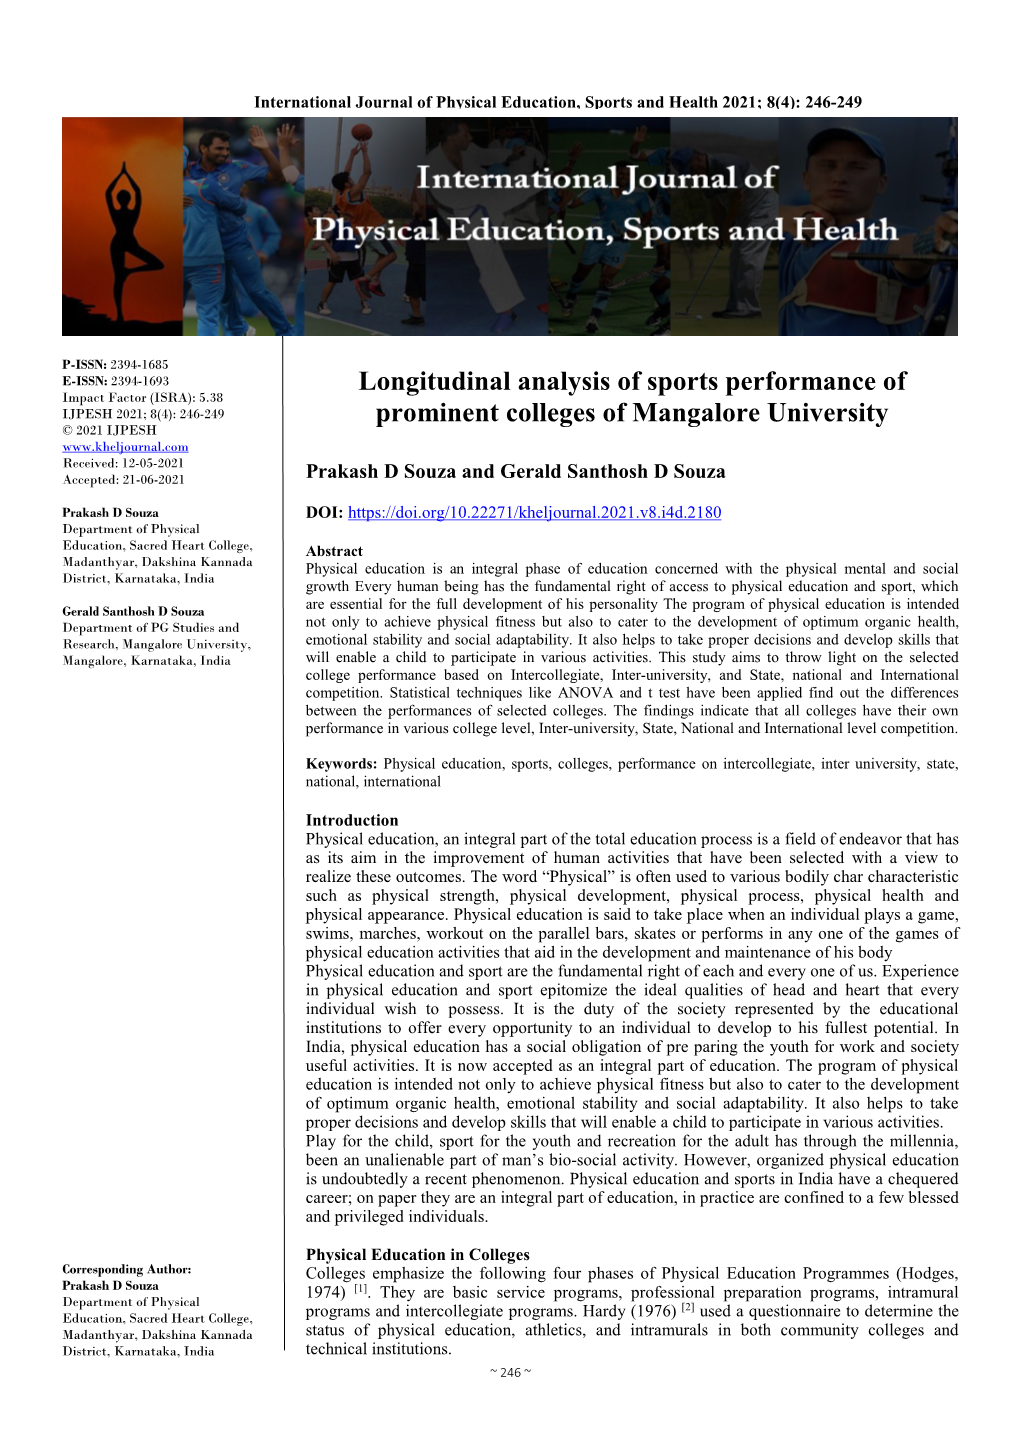 Longitudinal Analysis of Sports Performance of Prominent Colleges